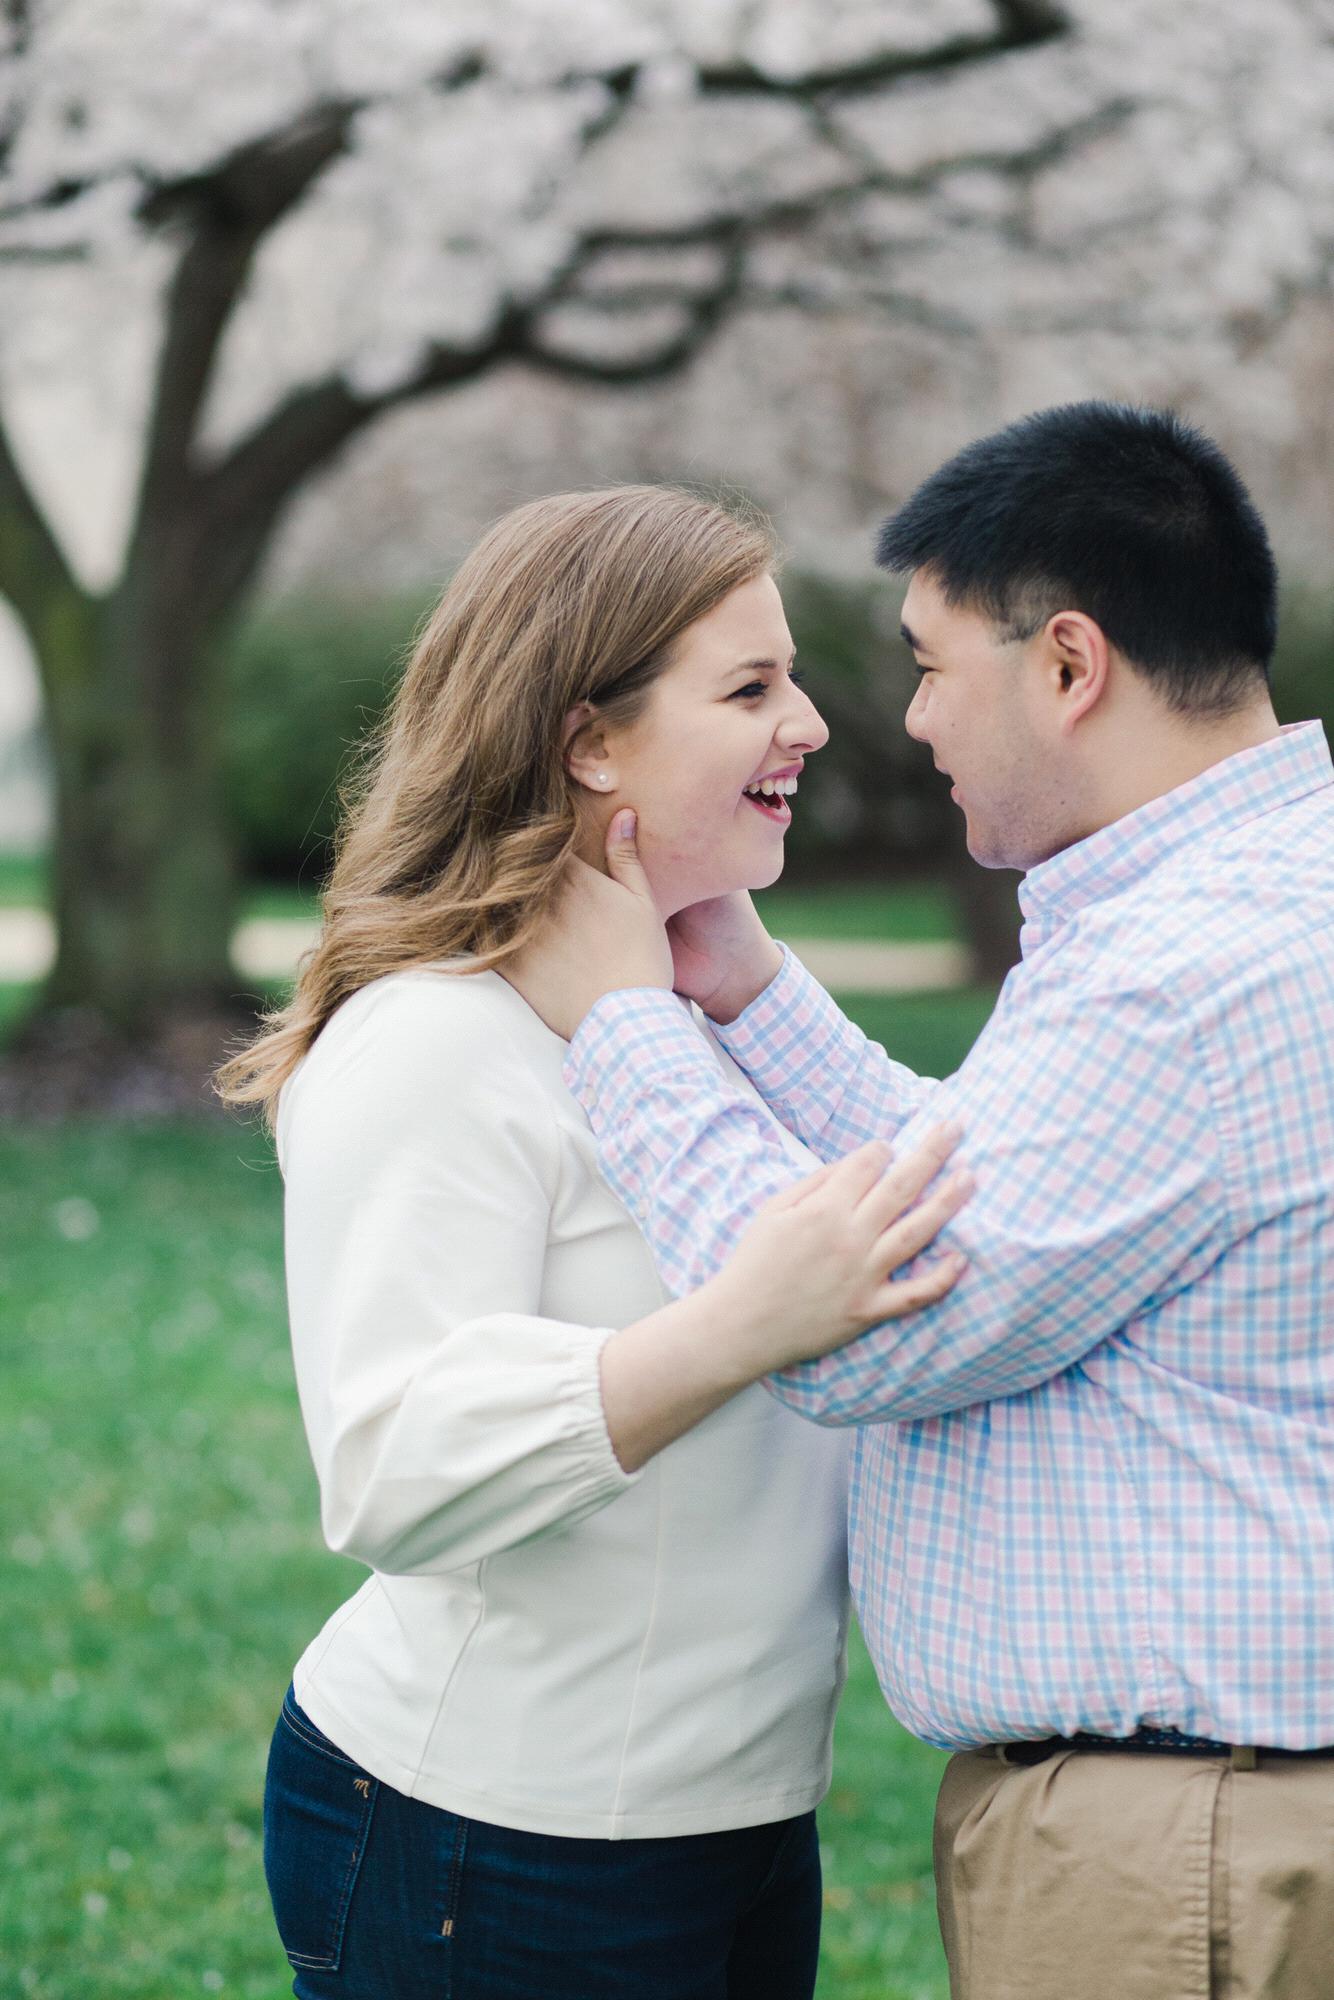 Cherry blossom engagement pictures at the Basilica of the National Shrine of the Immaculate Conception, March 2020. (Kate Grace Photography)